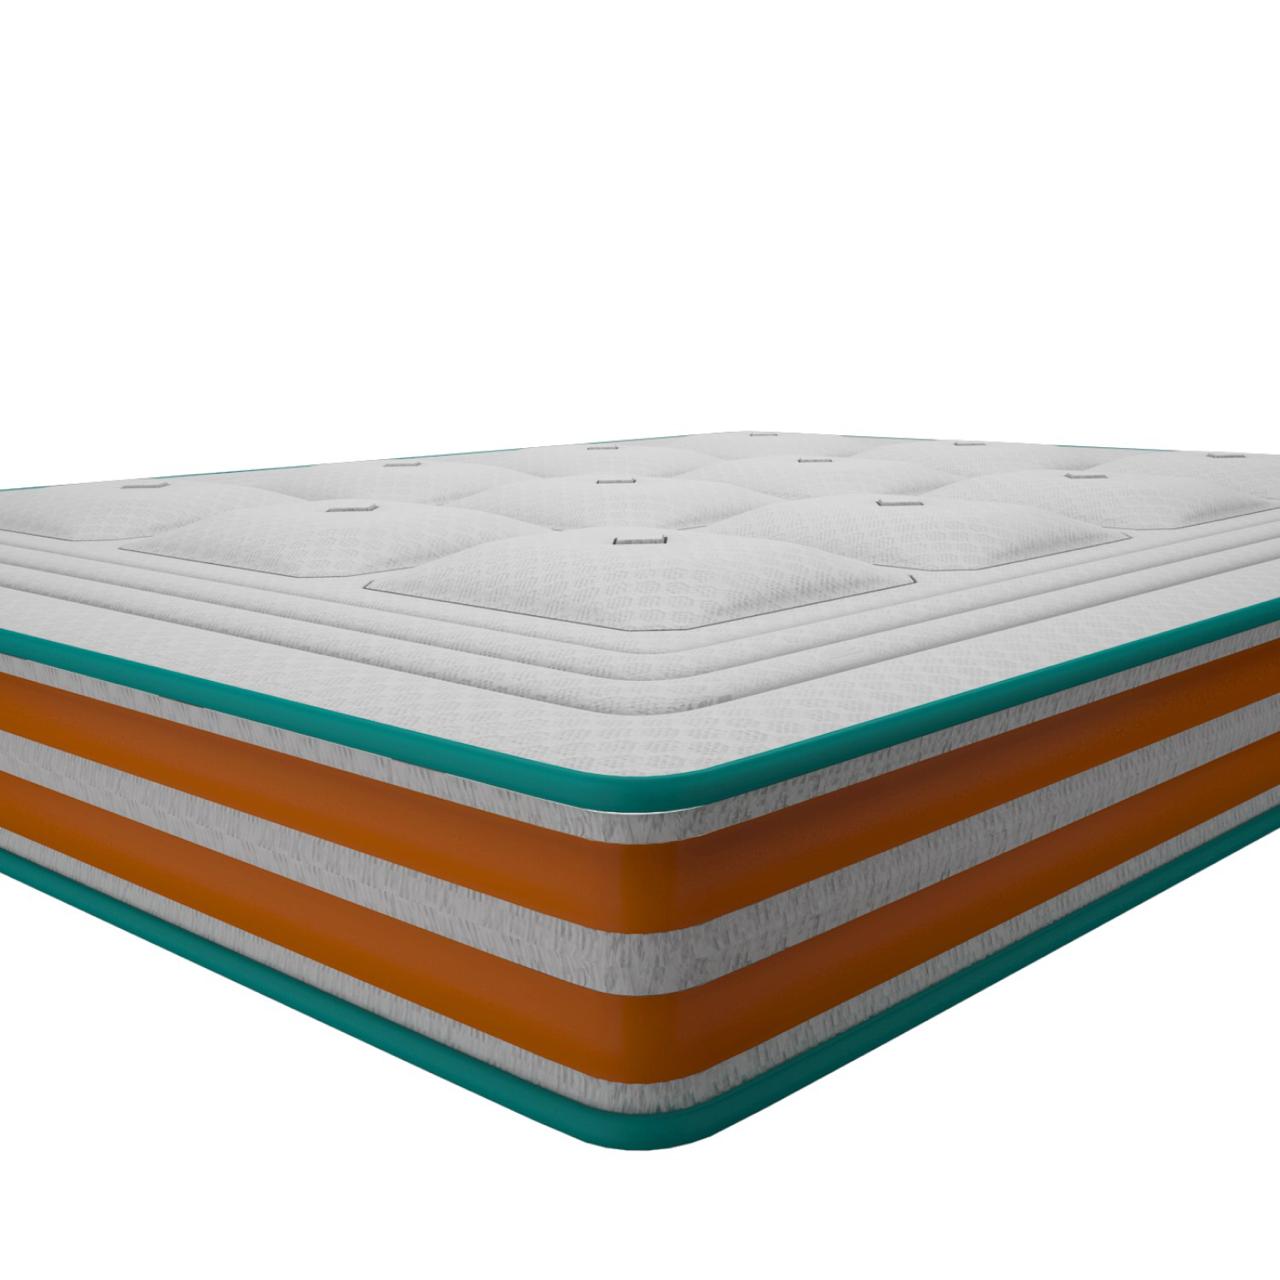 Orthopeadic Reversible 5 Inches Single Size Supersoft HR Foam Mattress by Restoria